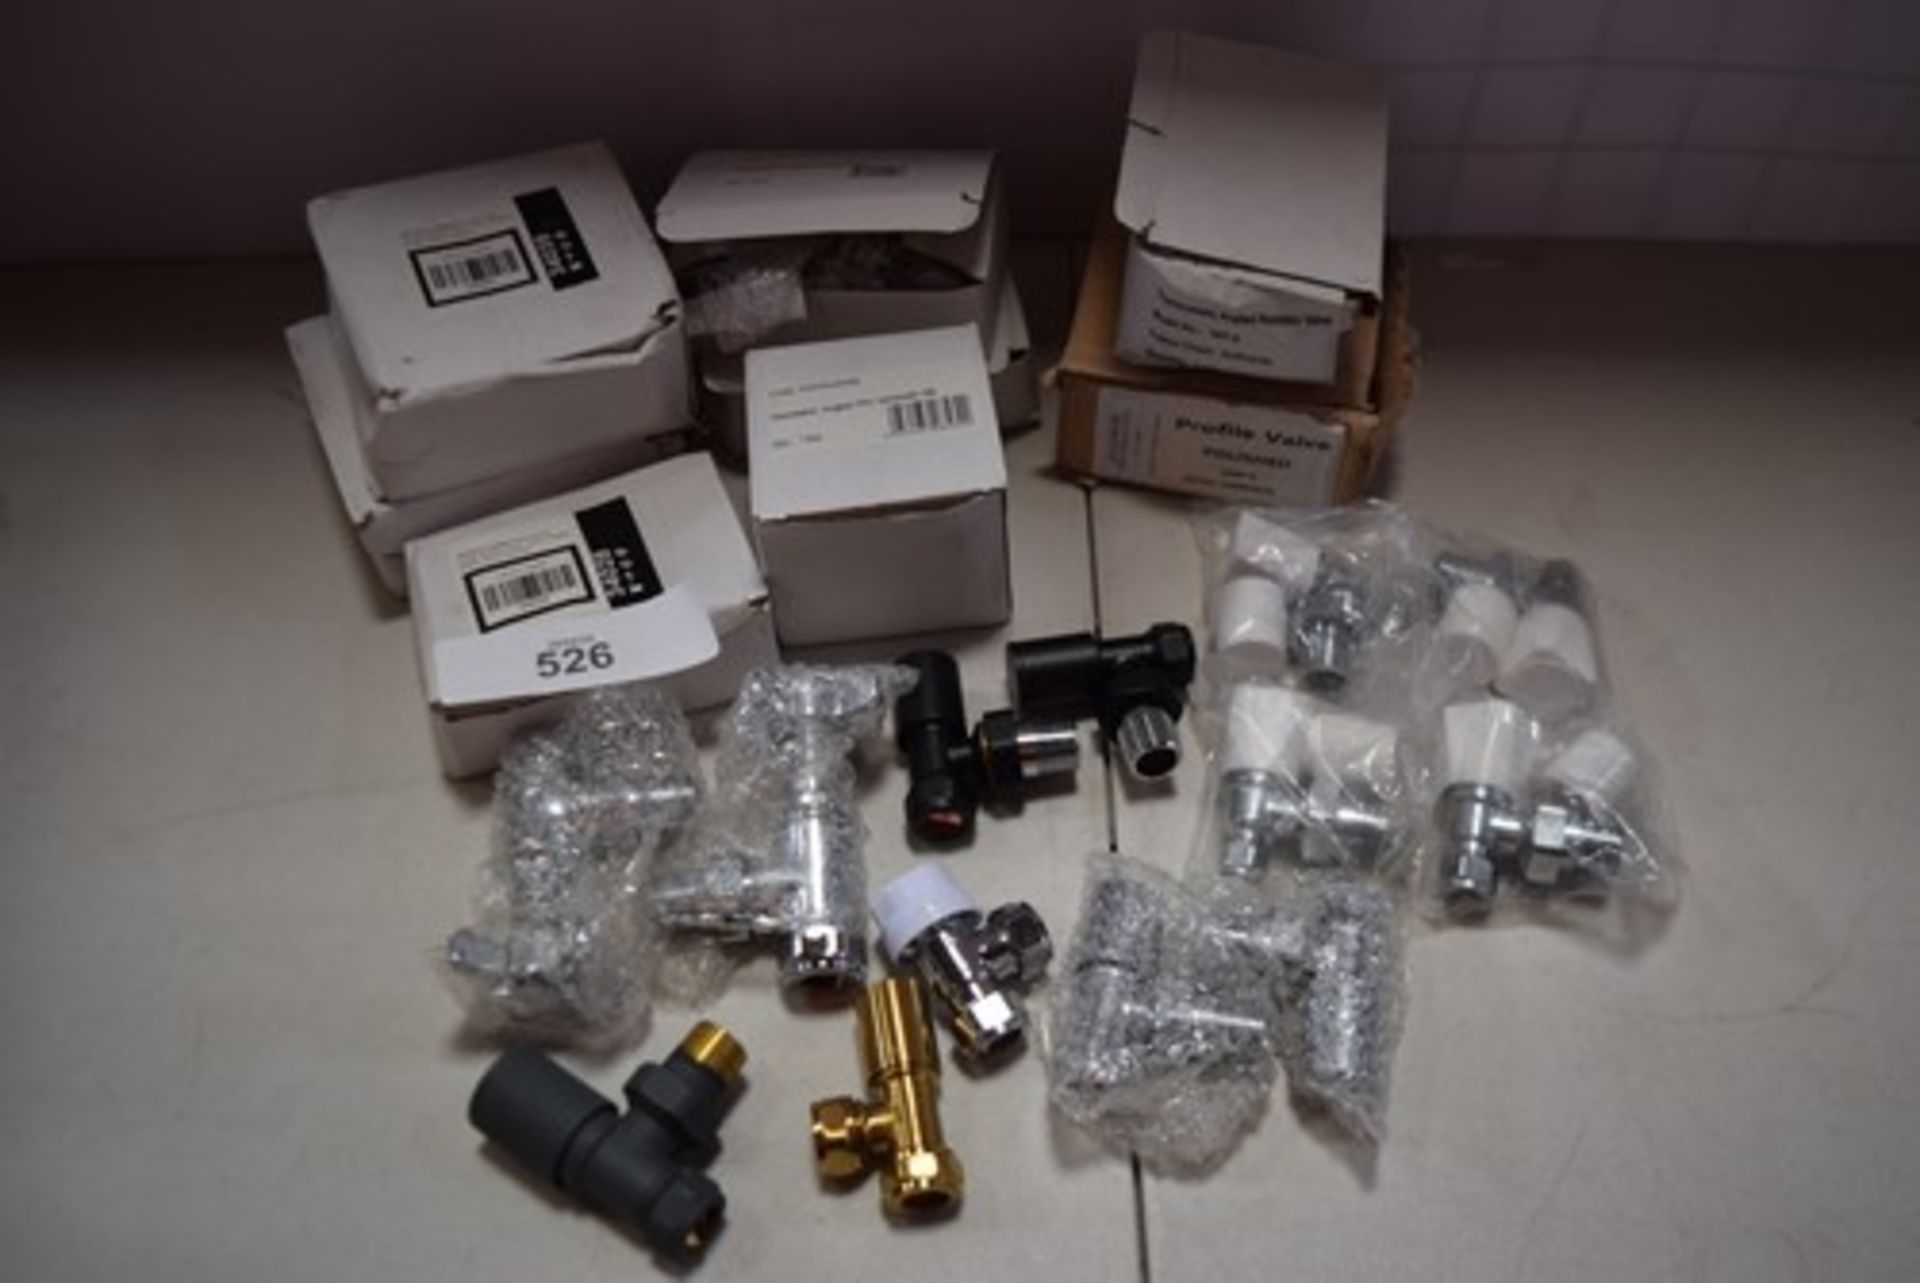 A selection of radiator valves and fixings, including Myson TRV2, Evolve angled radiator valves,